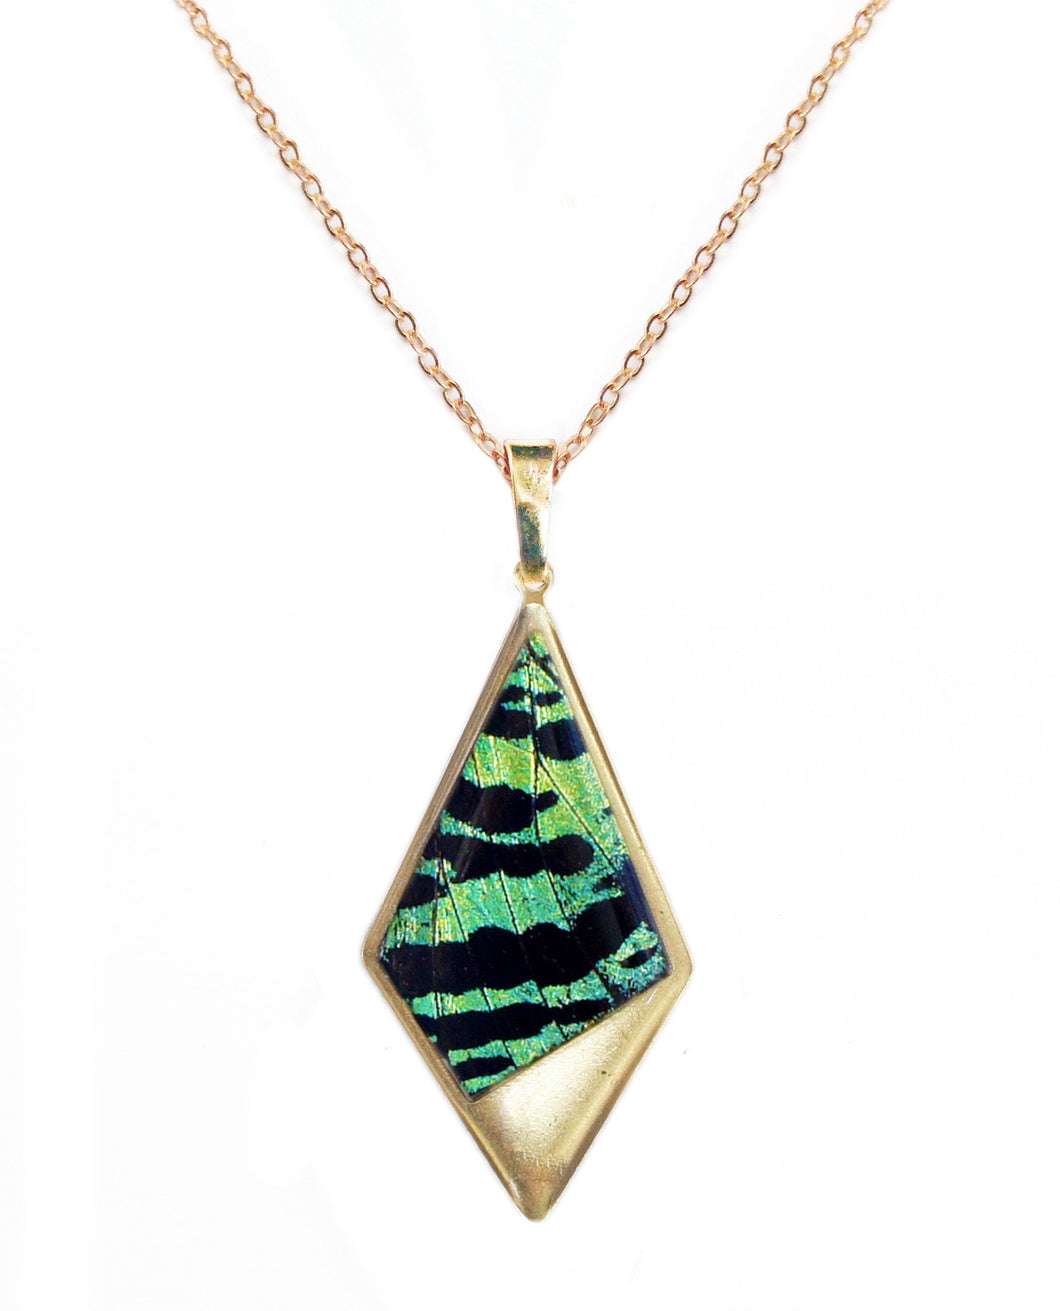 Real Butterfly Wing Kite Pendant Necklace - Green Sunset Moth Forewing